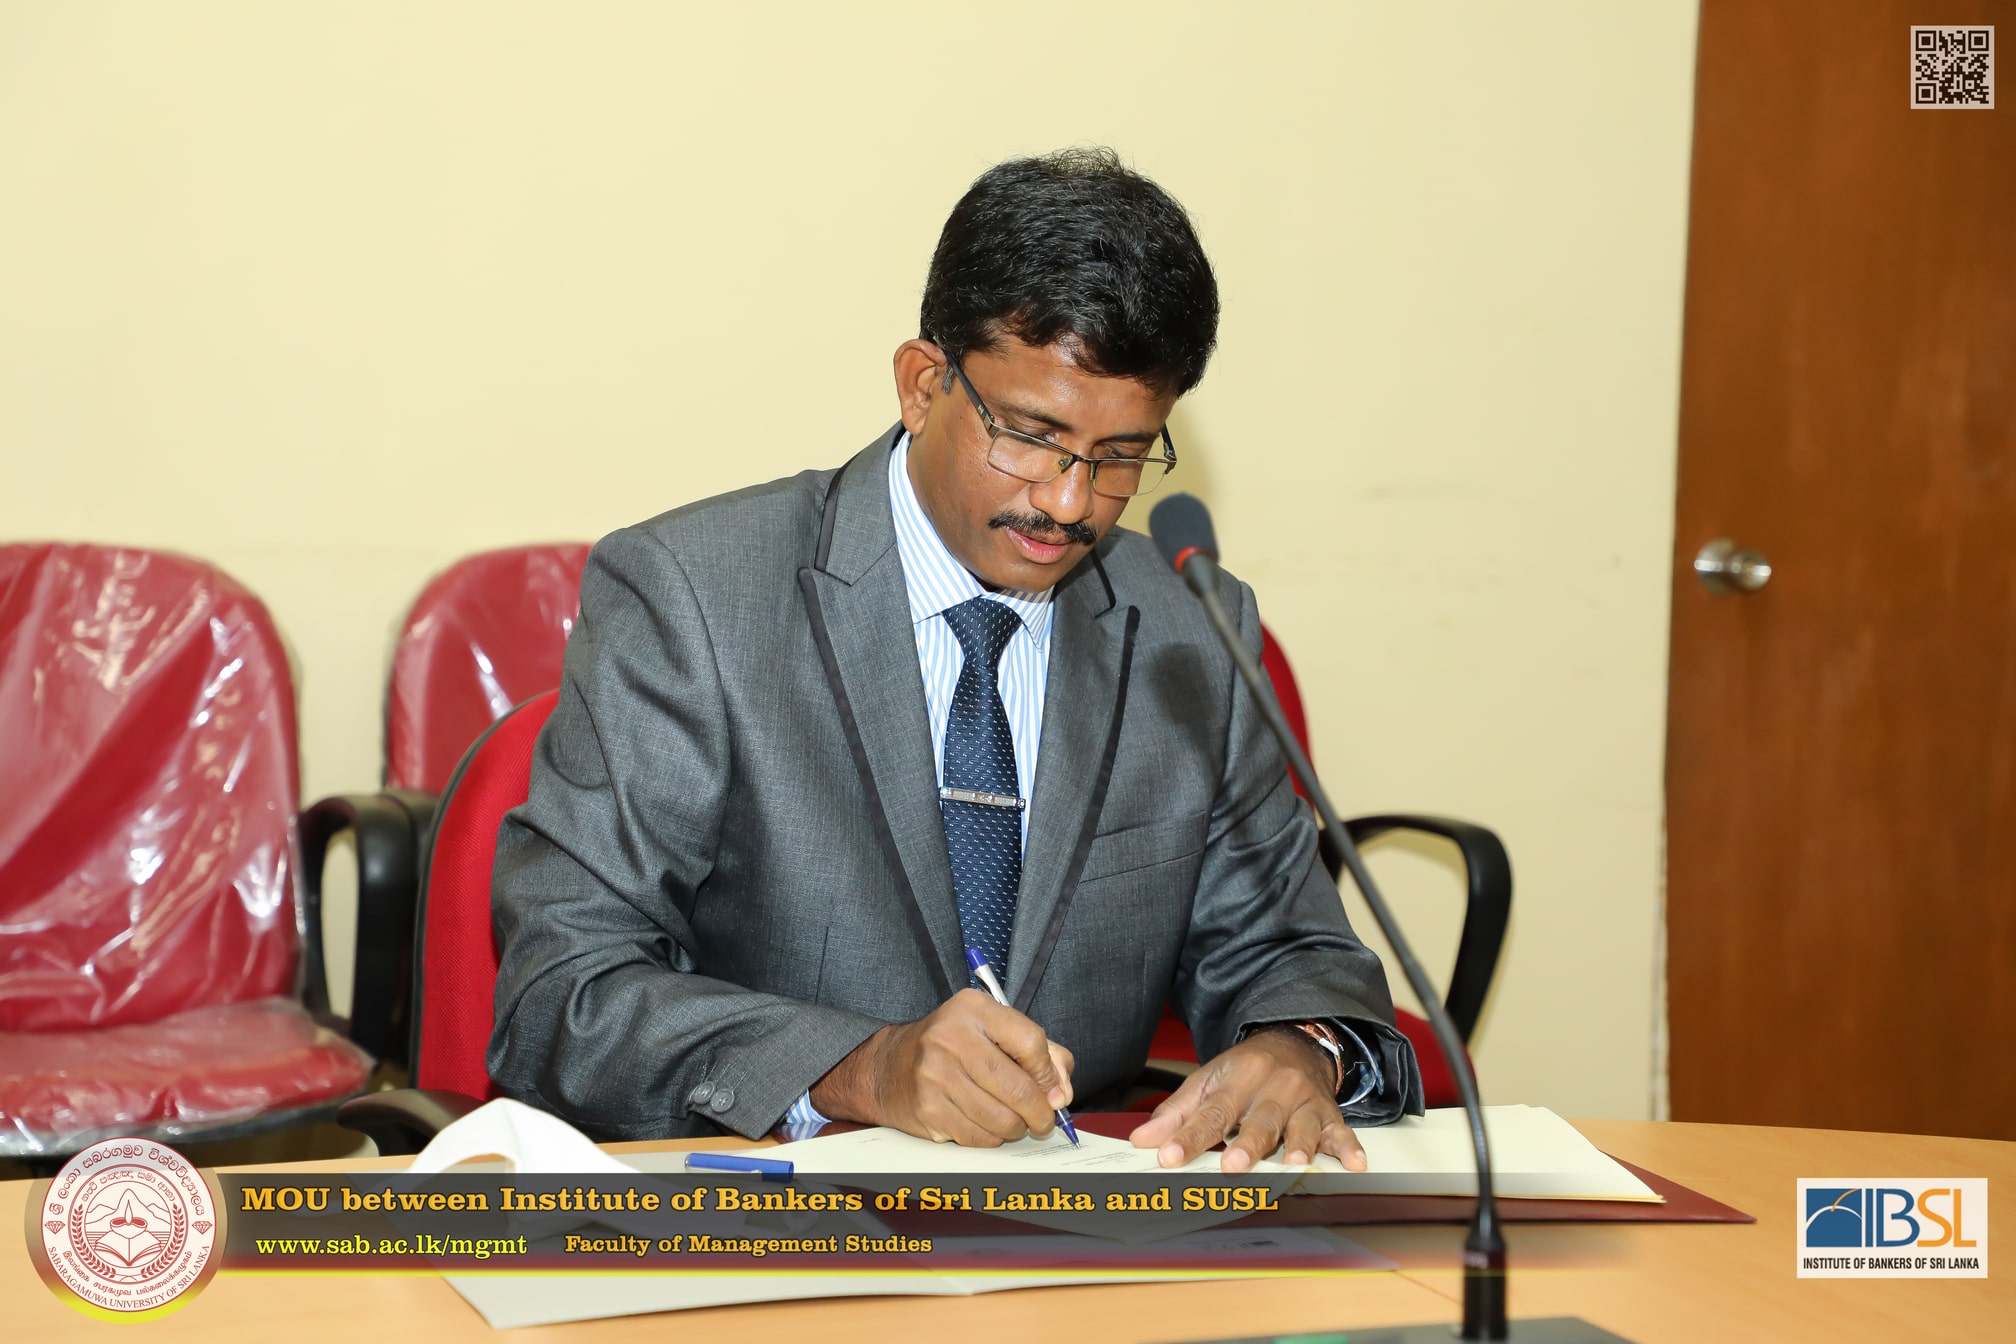 Faculty of Management Studies signs MOU with Institute of Bankers of Sri Lanka